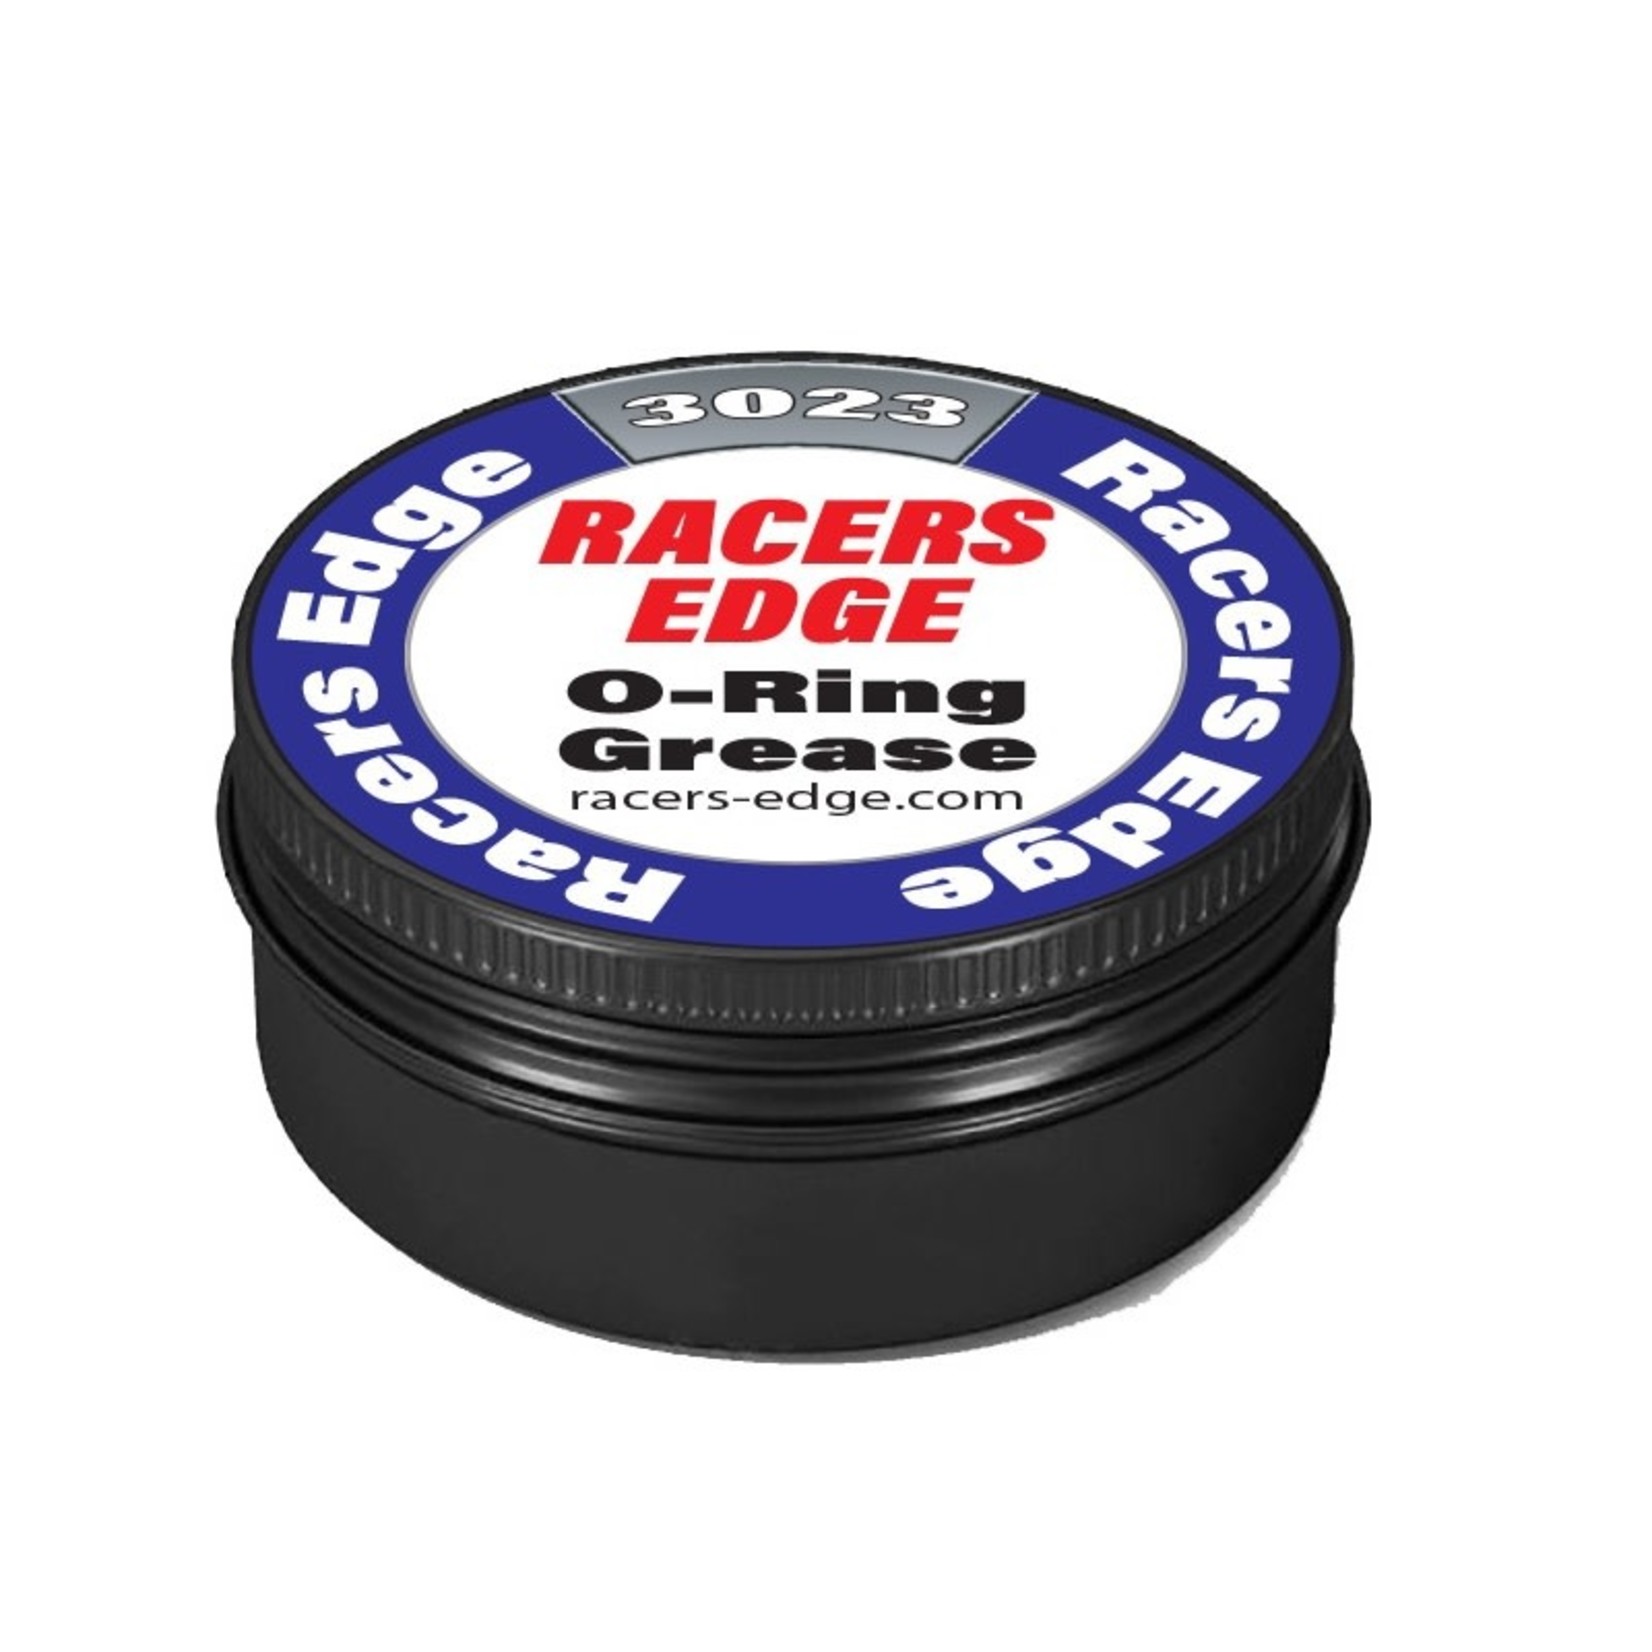 Racers Edge RCE3023 Racers Edge O-Ring Grease 8mil